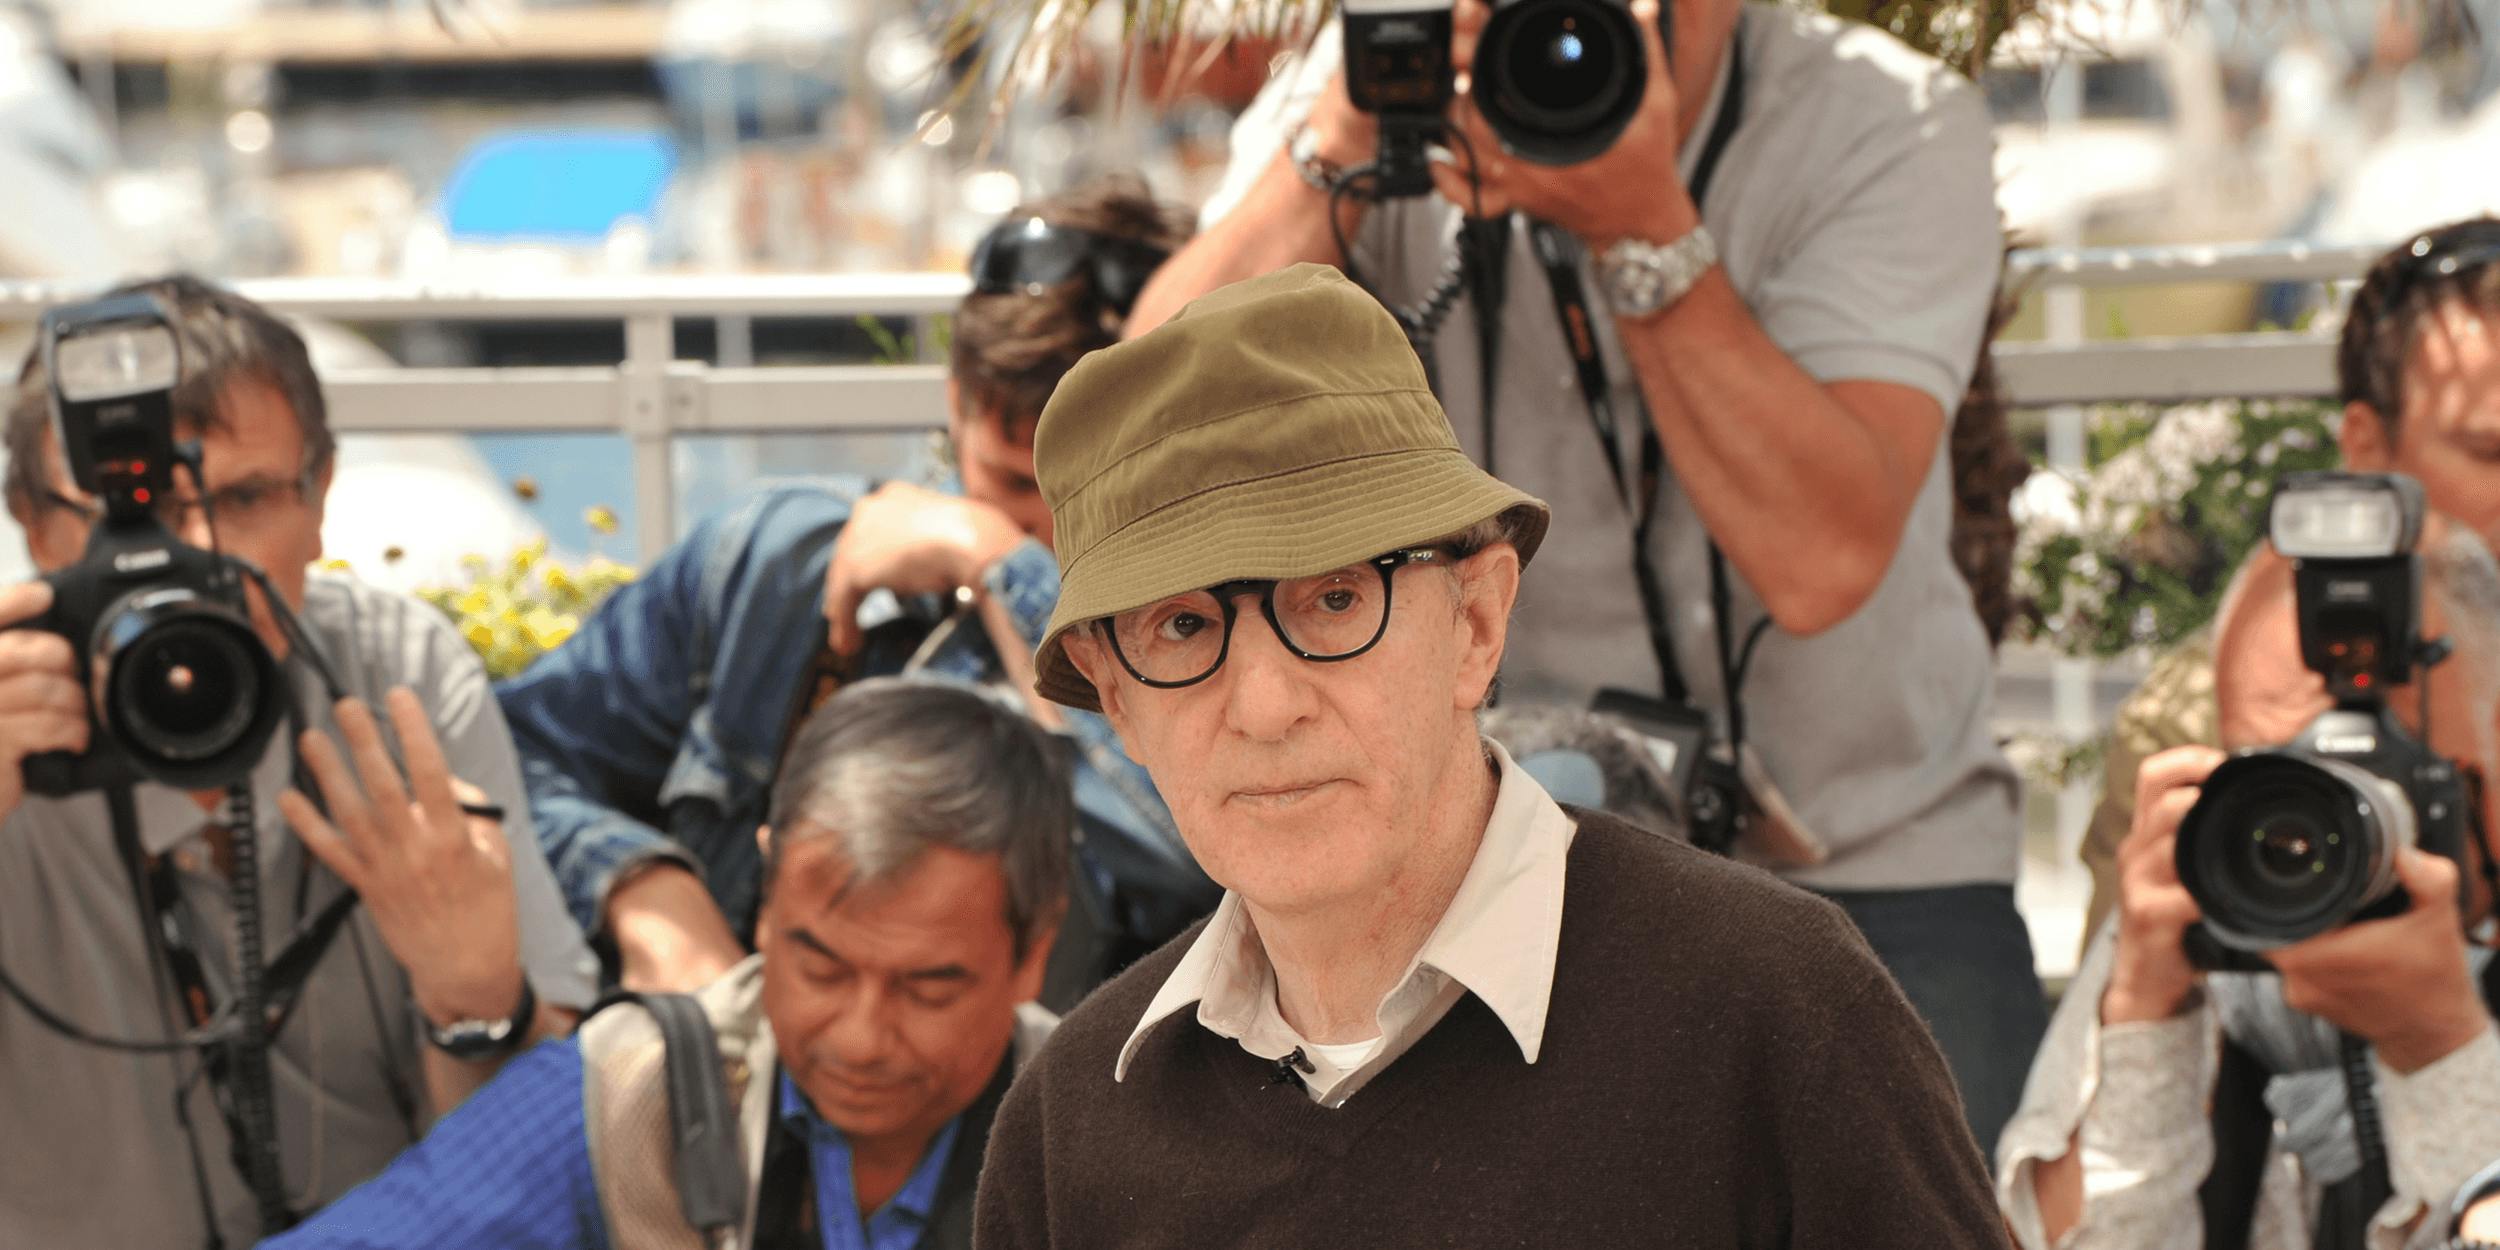 Woody Allen stated that he didn't want the Weinstein scandal to cause a "witch hunt atmosphere"